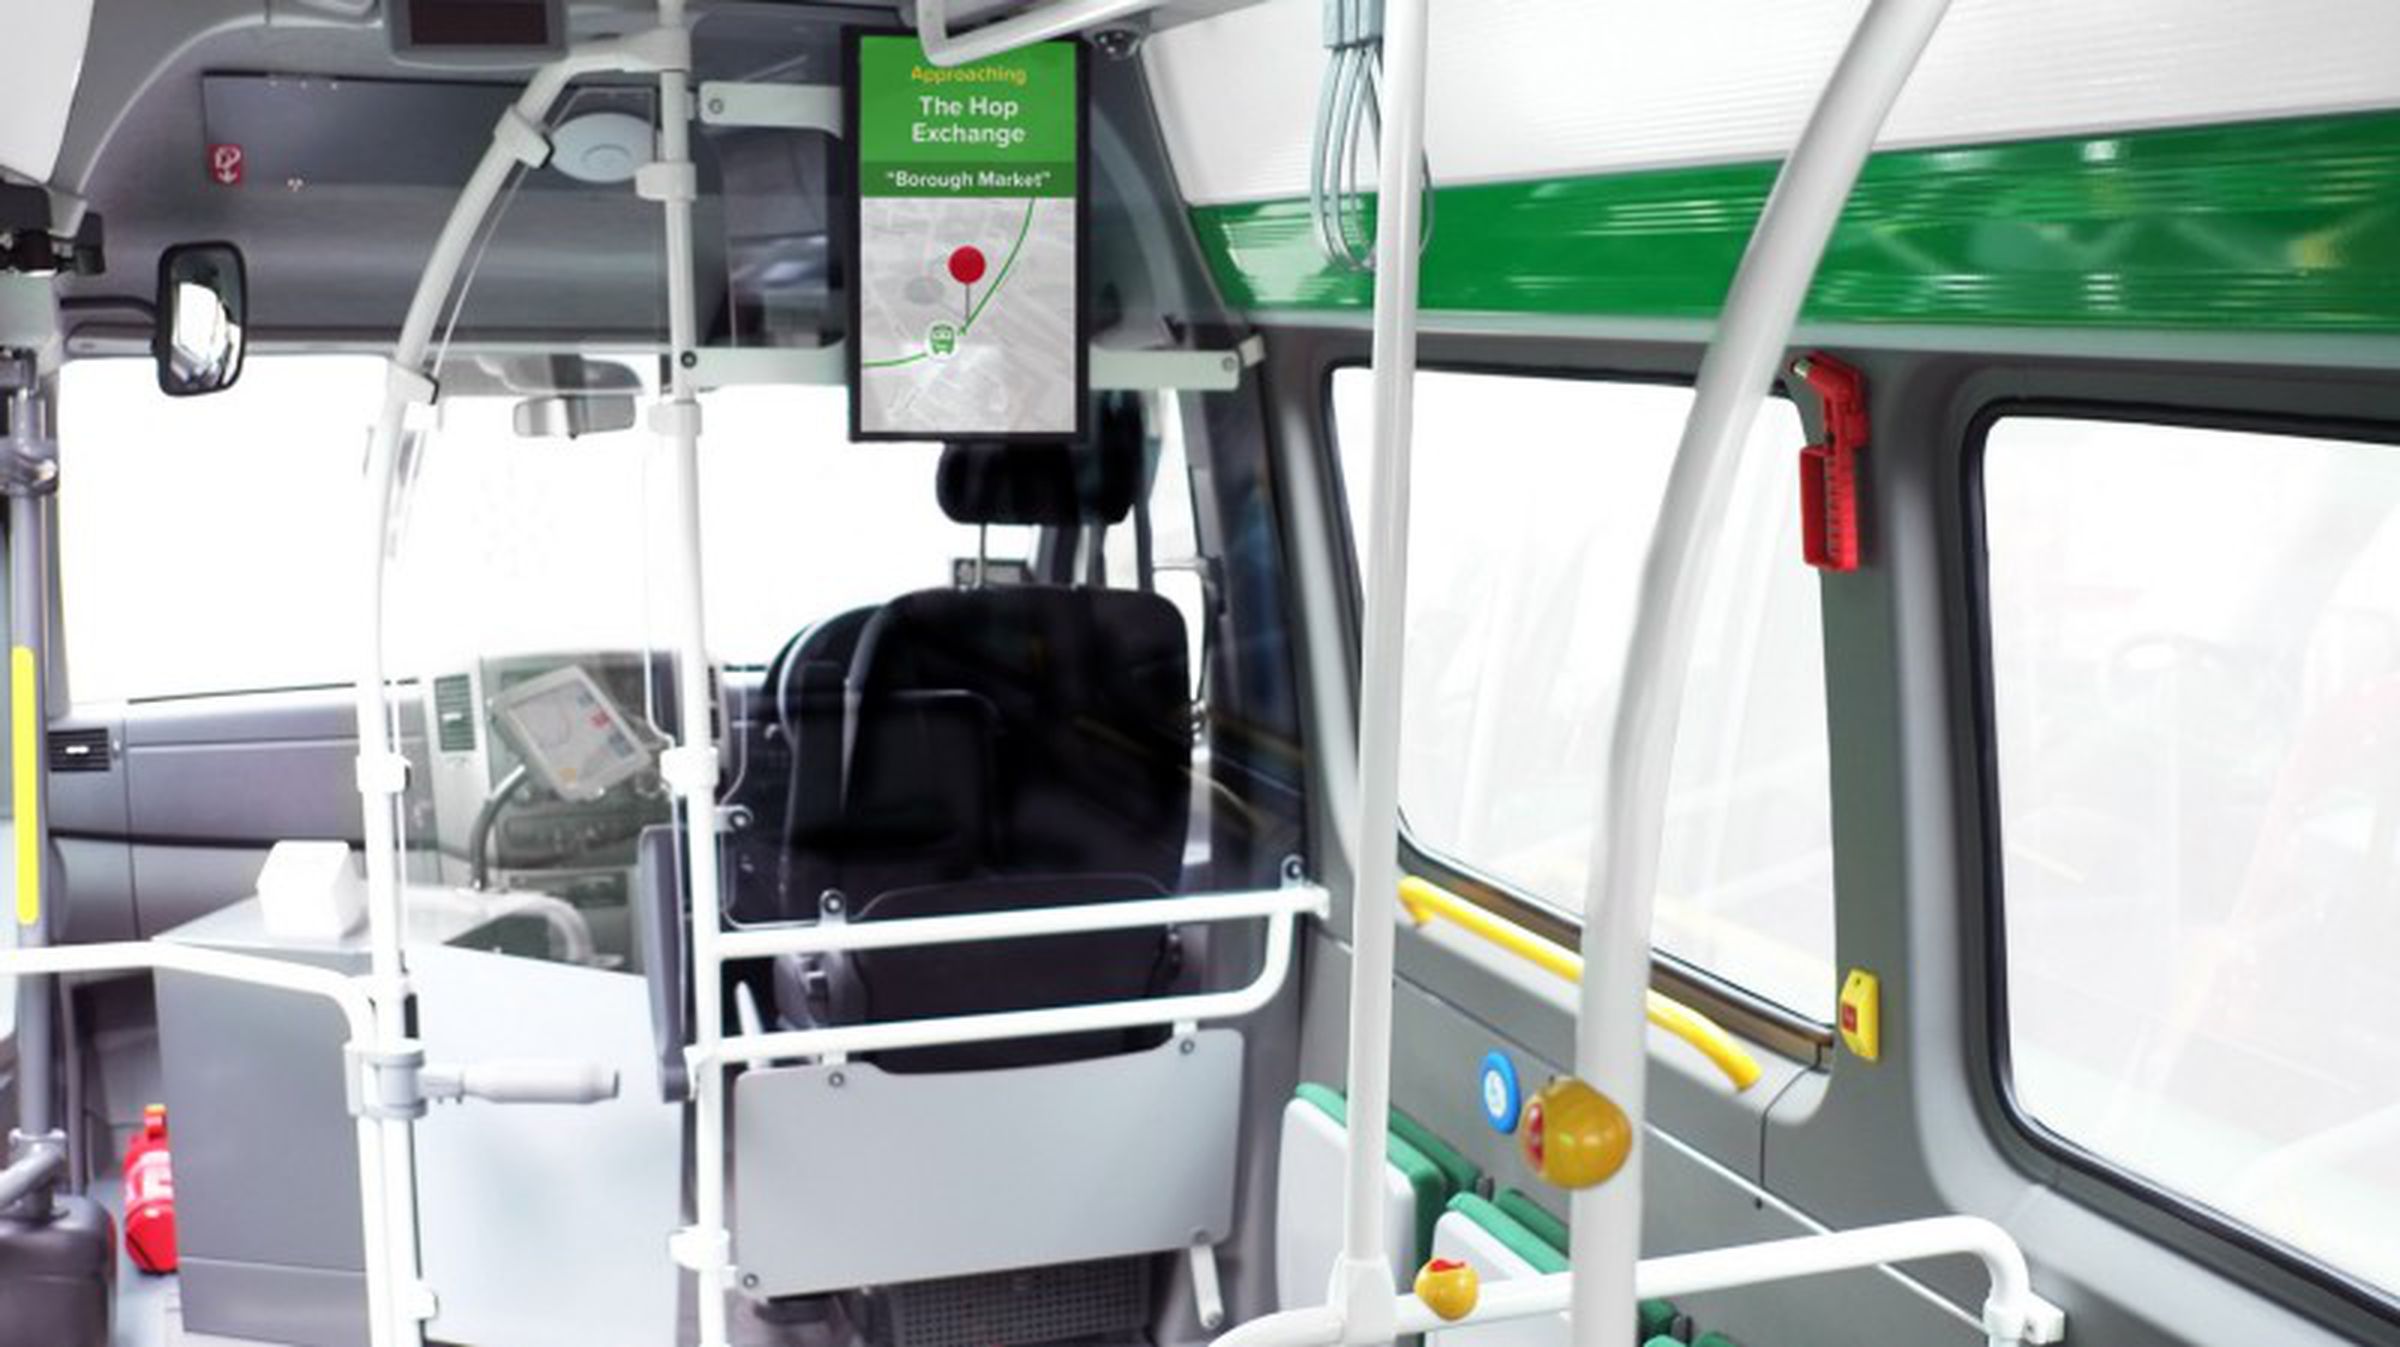 The buses will have large-screen displays for showing routes, and will be kitted out in Citymapper’s signature green livery.